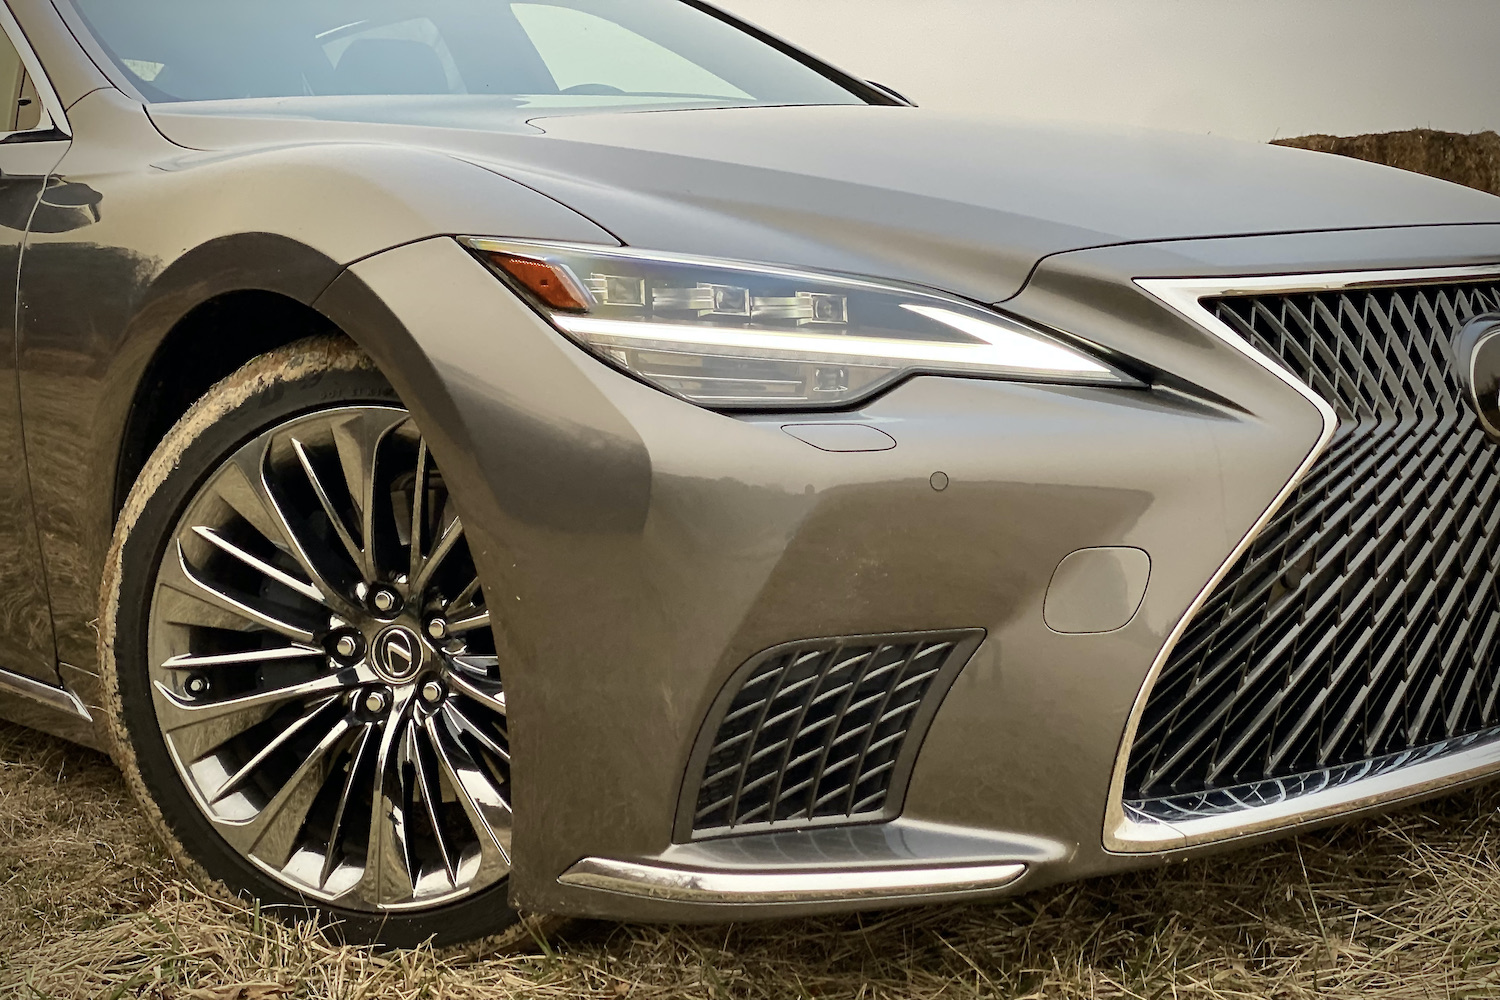 A close-up of the 2021 Lexus LS500's front headlight from passenger's side on a grassy field.